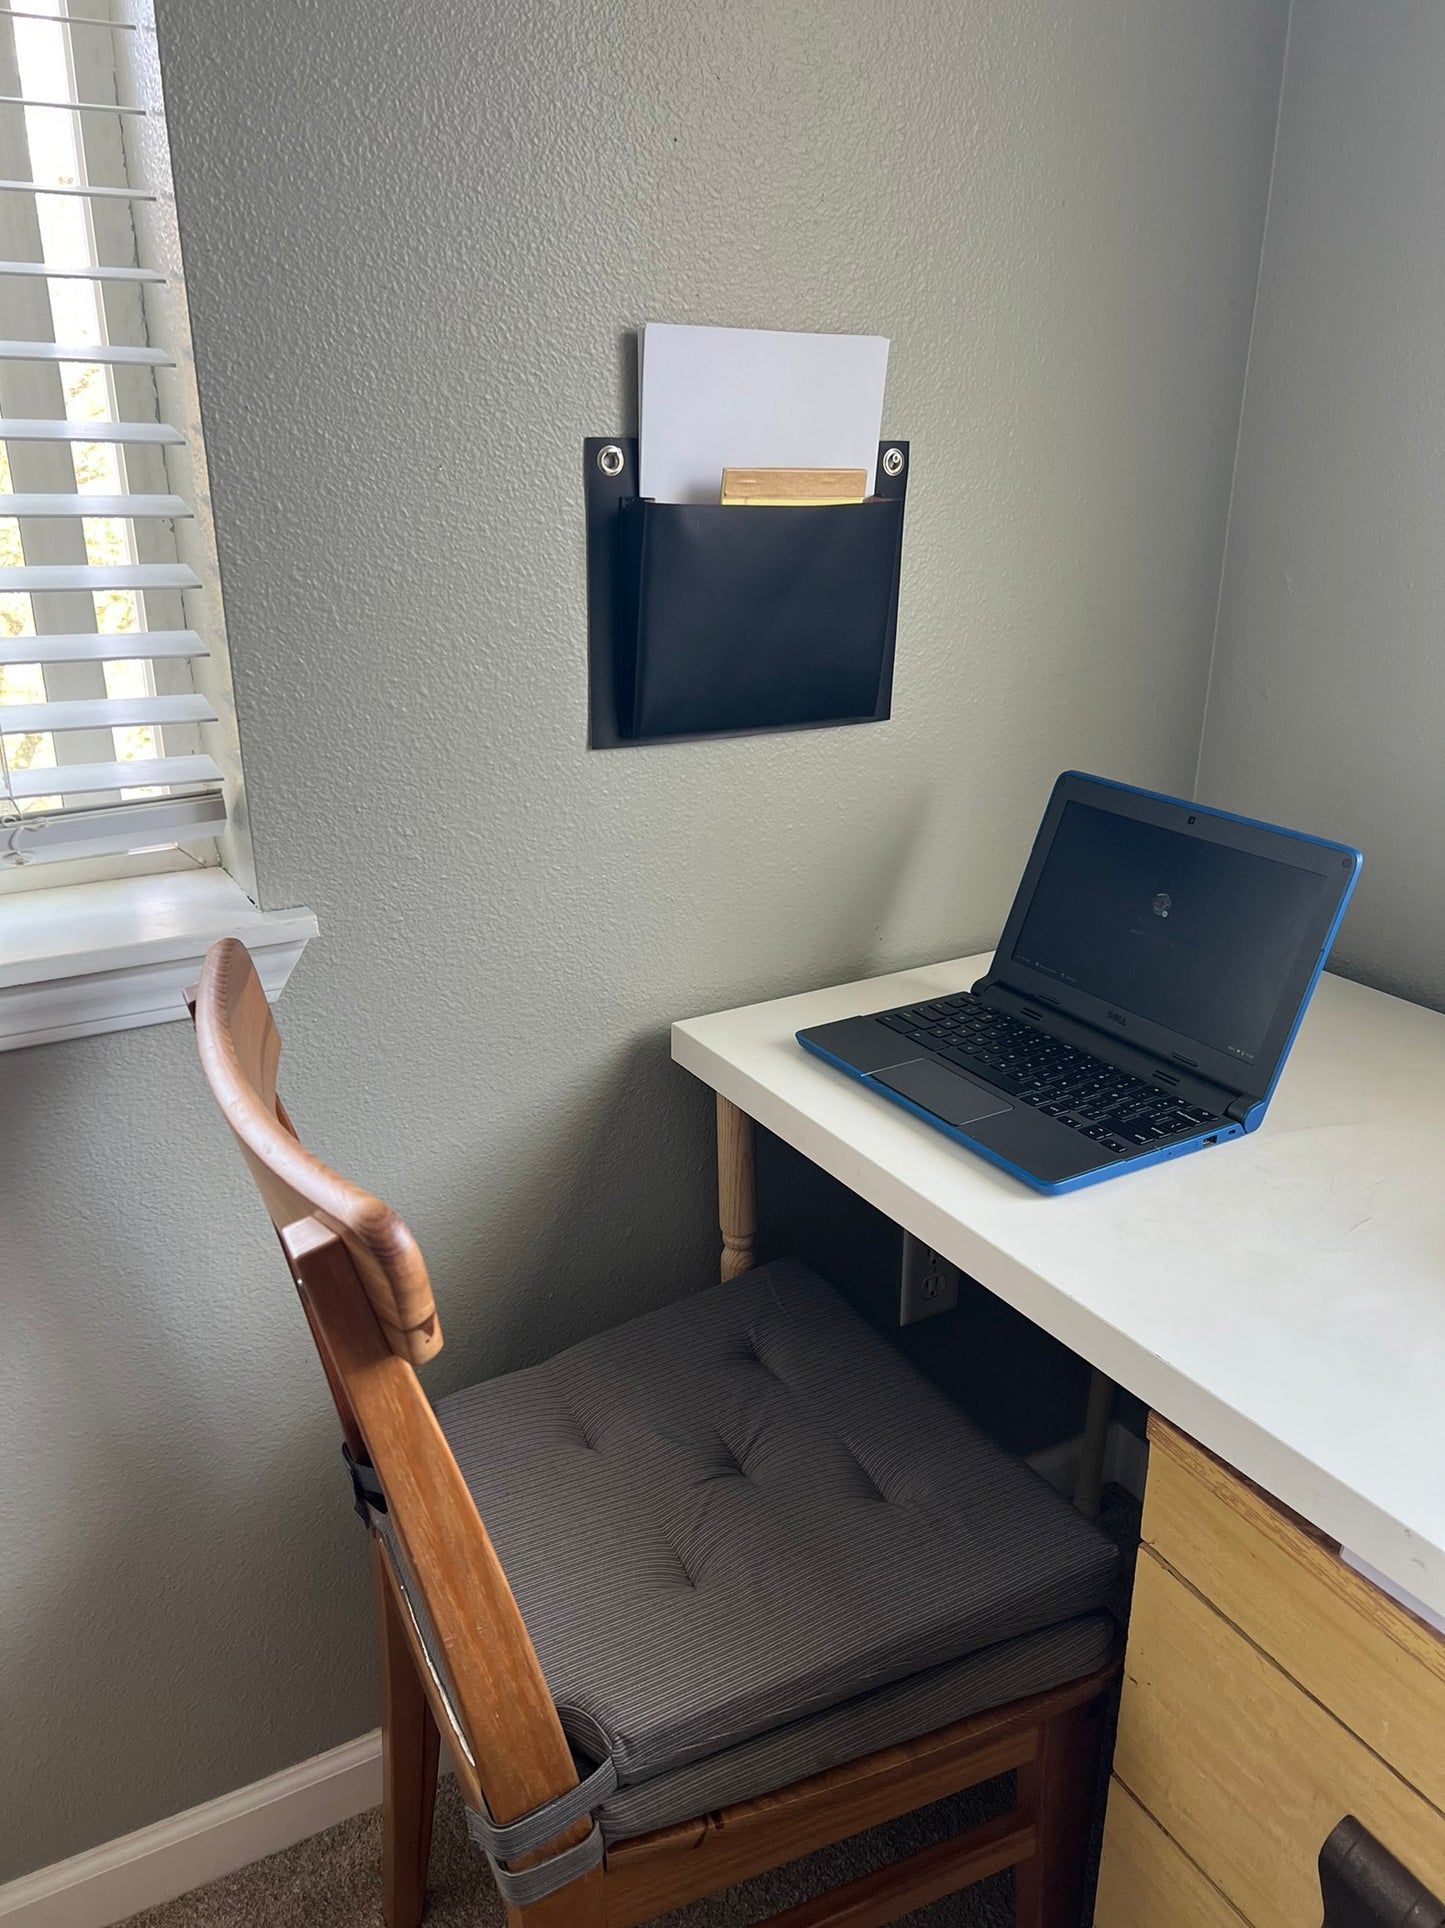 Black leather wall pocket hangs in light, bright home office.